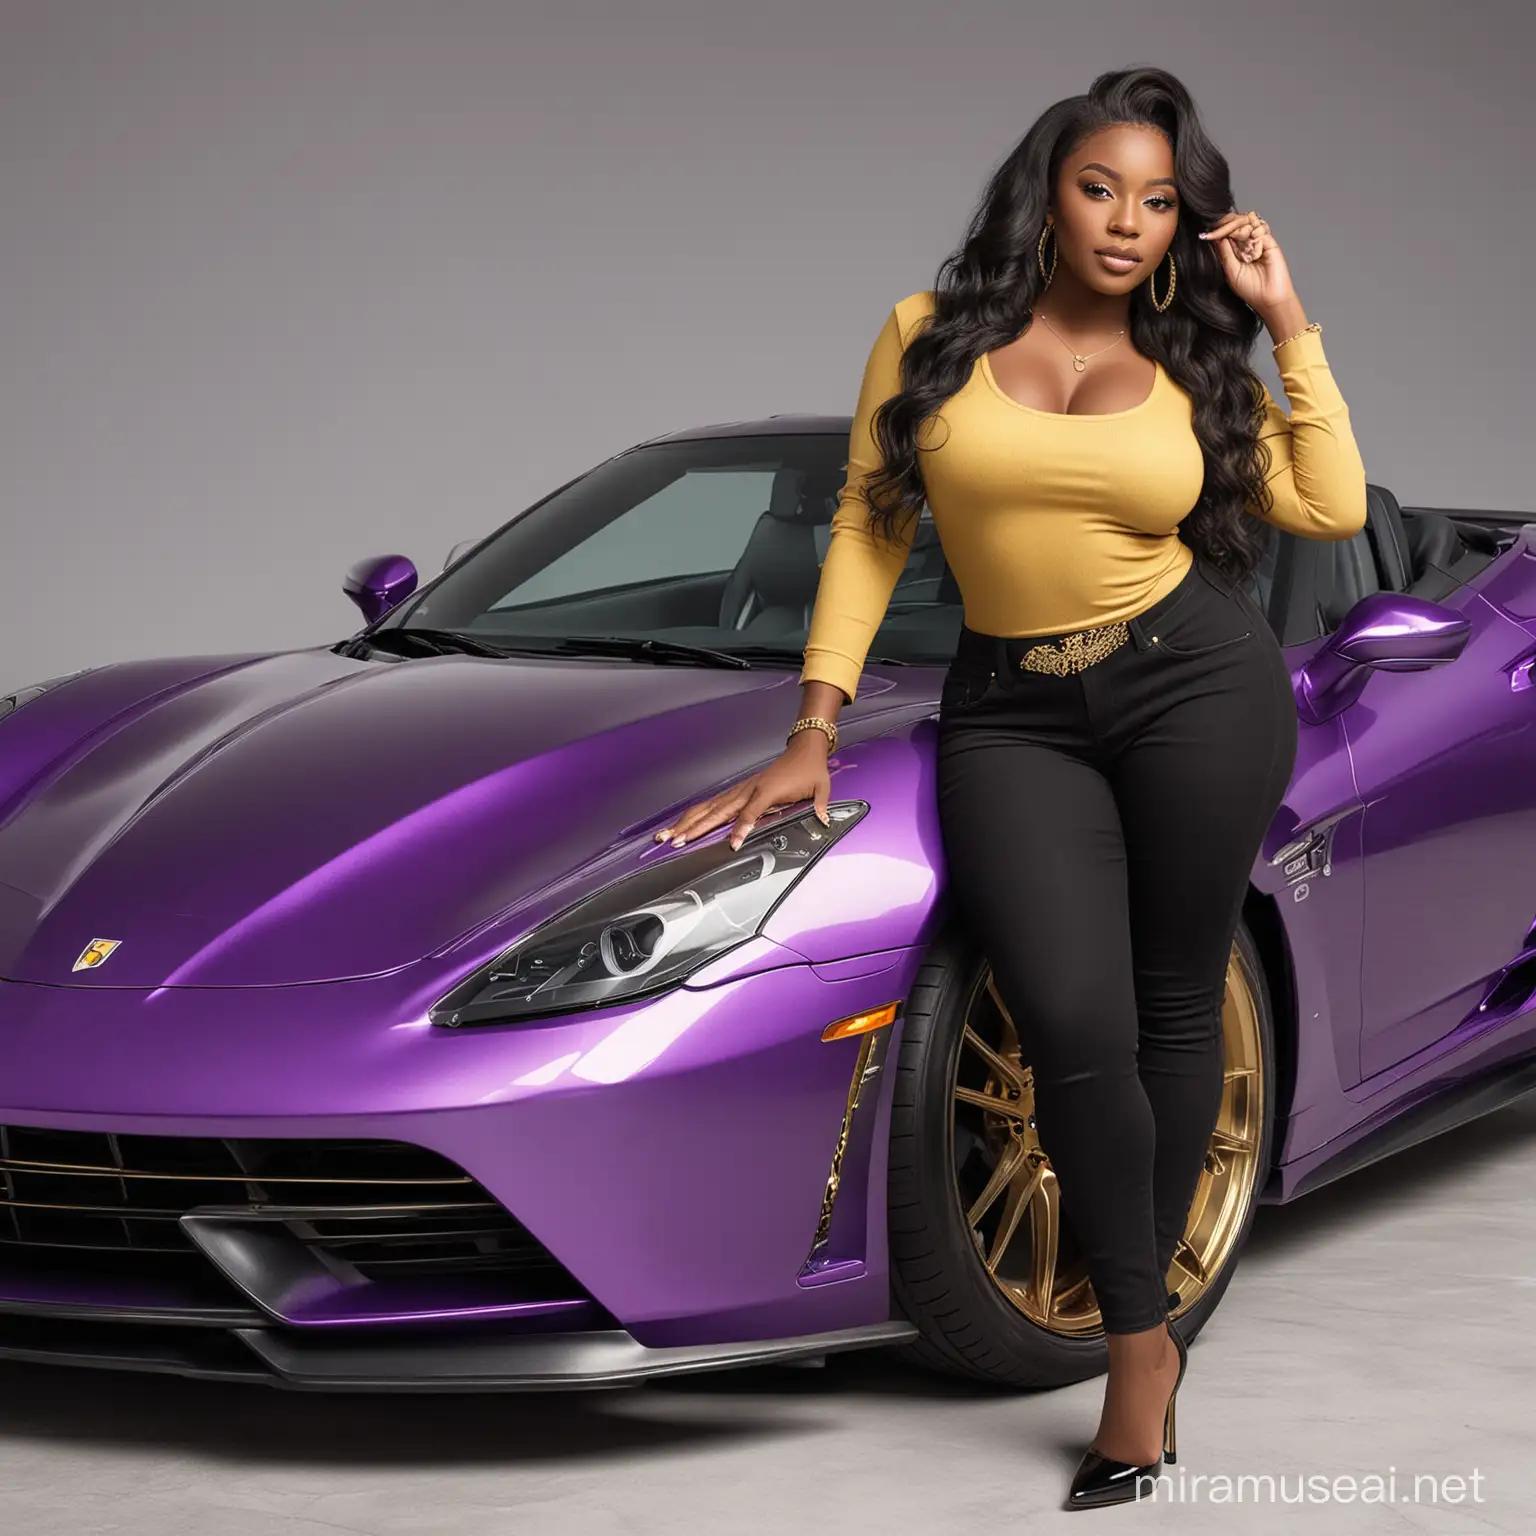 create a hyper realistic image of a beautiful curvy size African American woman with long black wavy hair wearing gold jewelry and a purple top with black  jeans and purple and black stilettos. she's leaning on a purple sport car.